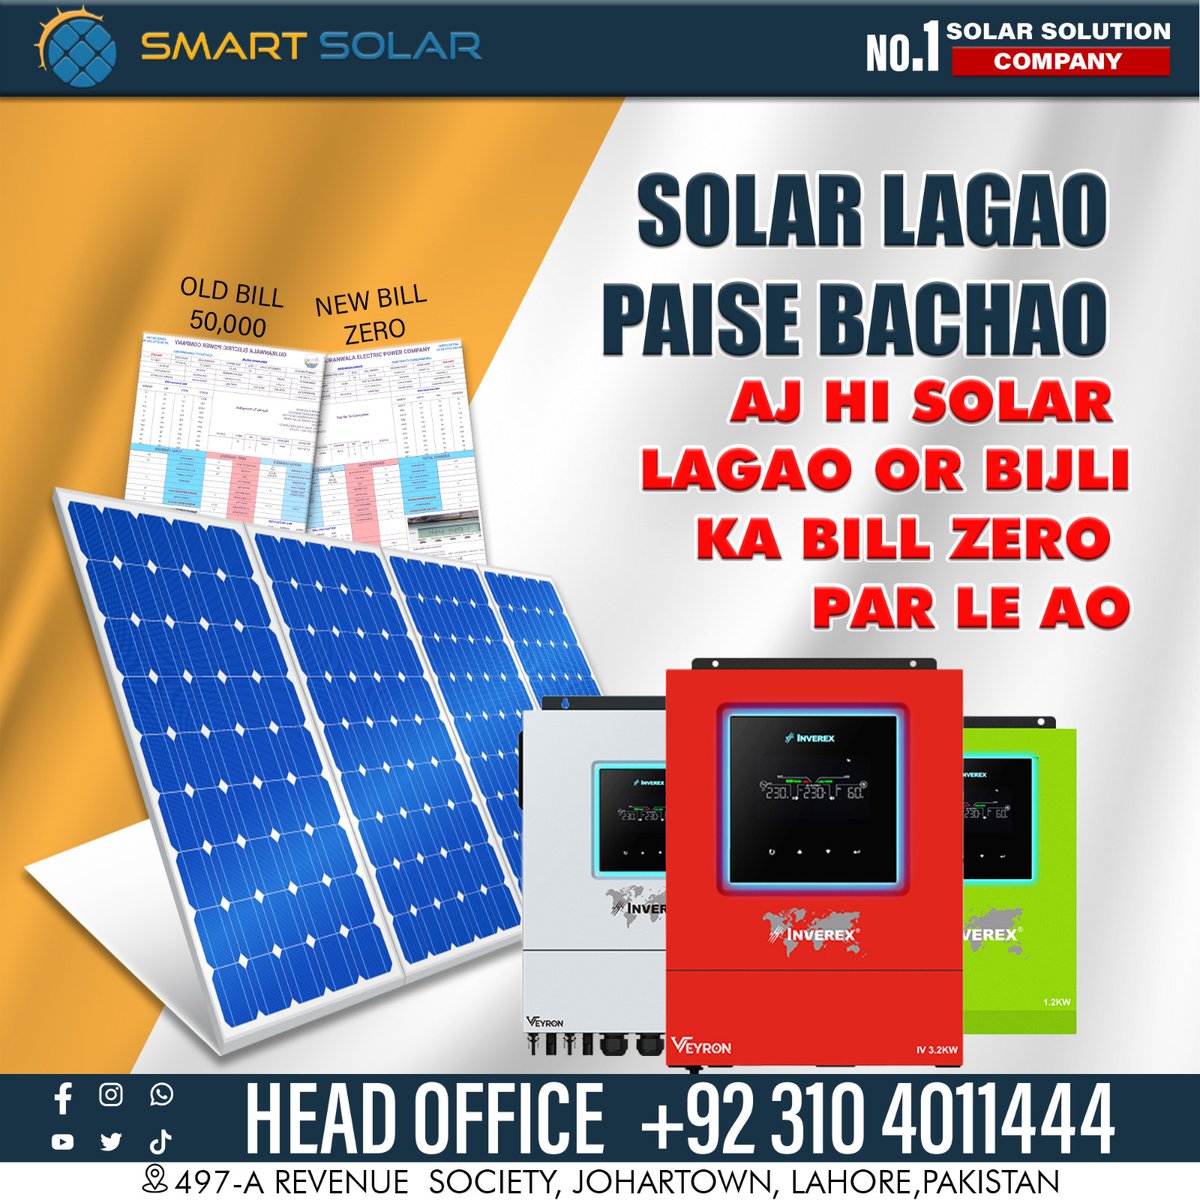 Save Costs with Solar System! Renewable Energy Solutions for Residential users. For more details please contact 0311-4011444 #SmartSolar #Solar #SolarPanels #SolarBatteries #SolarInverters #SolarInstallation #SolarHeater